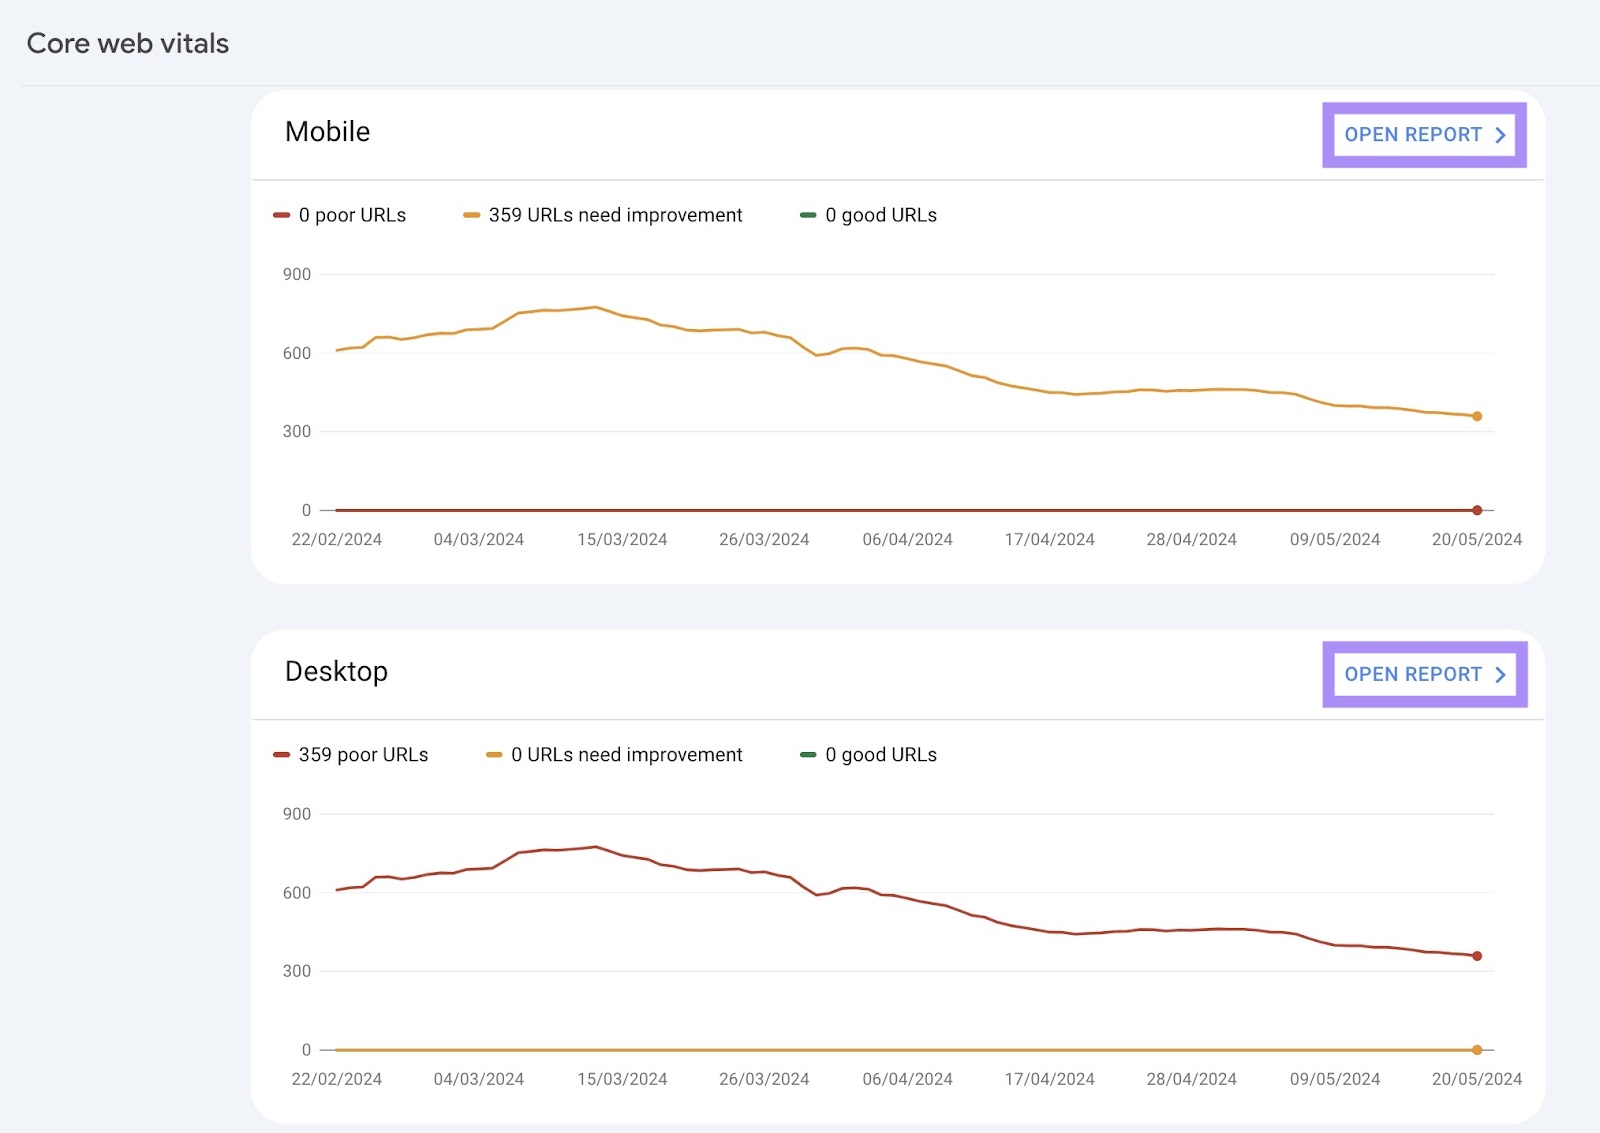 Core web vitals report on GSC showing two charts with the status of the URLs on mobile and desktop respectively.